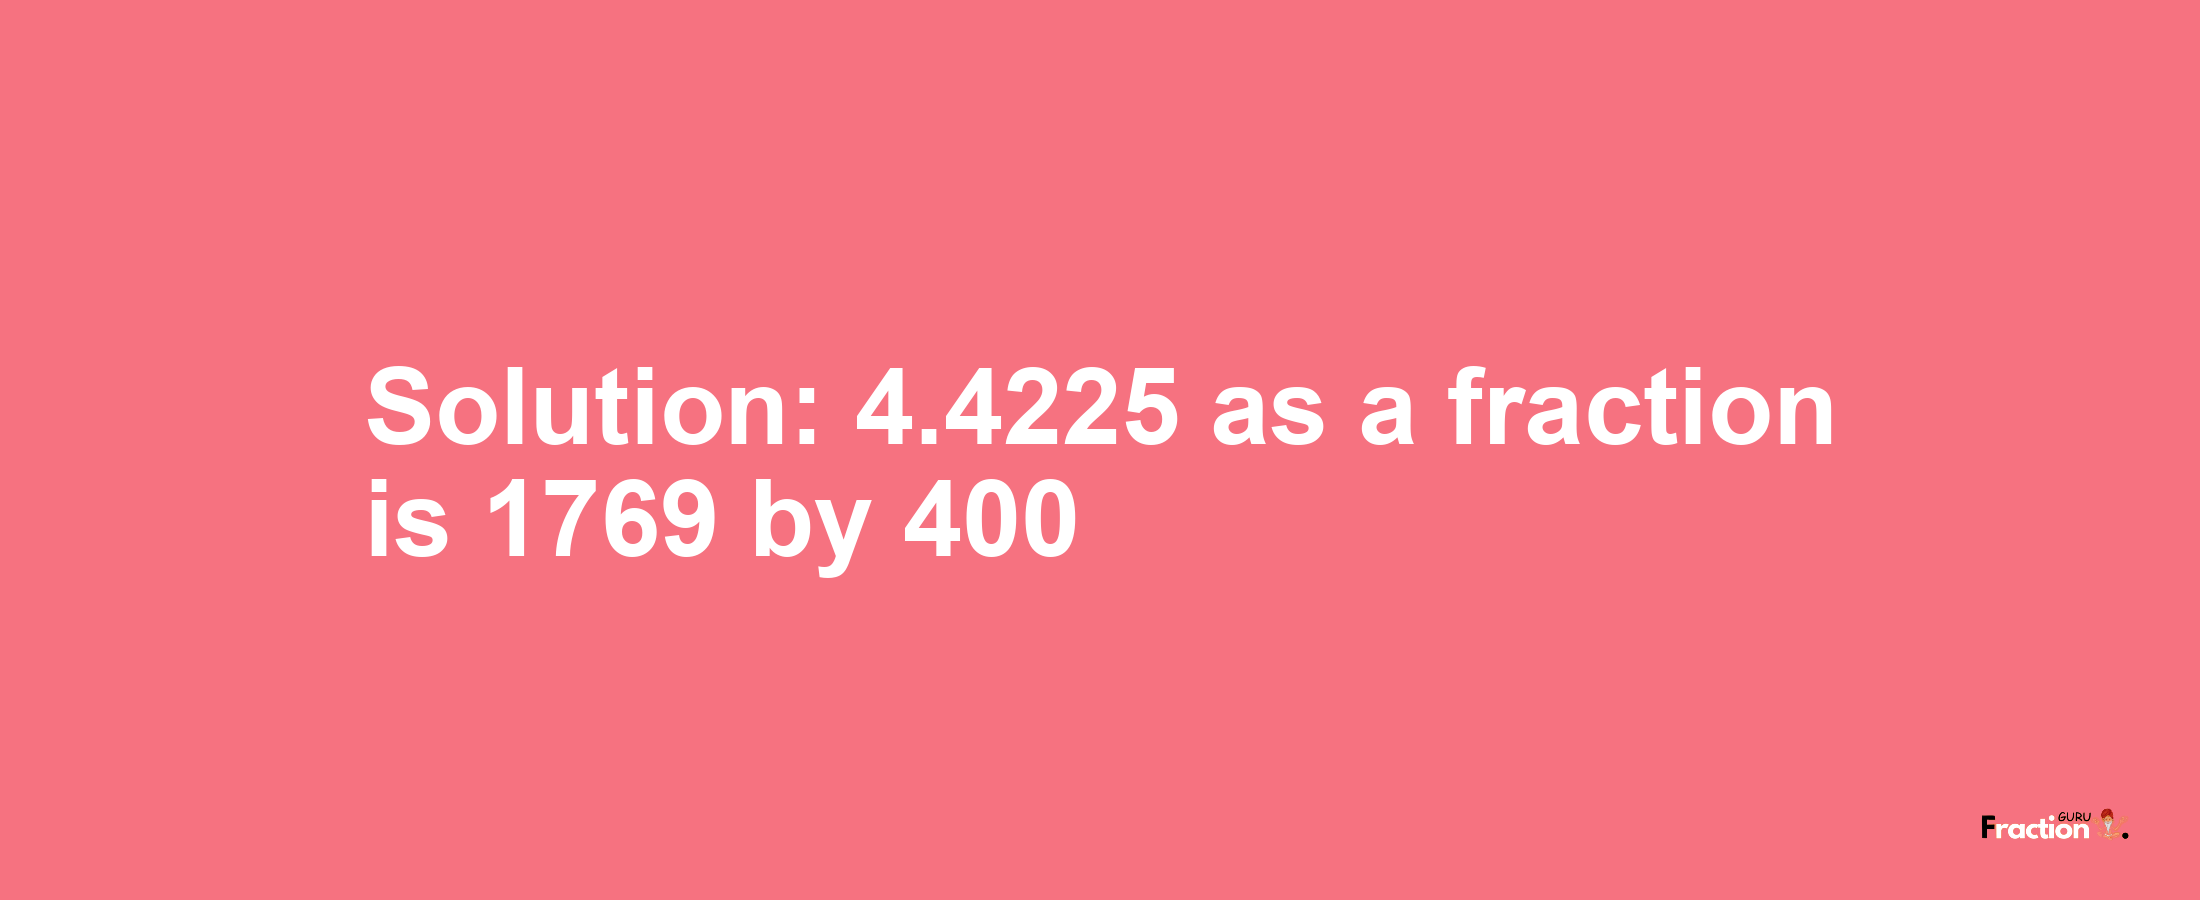 Solution:4.4225 as a fraction is 1769/400